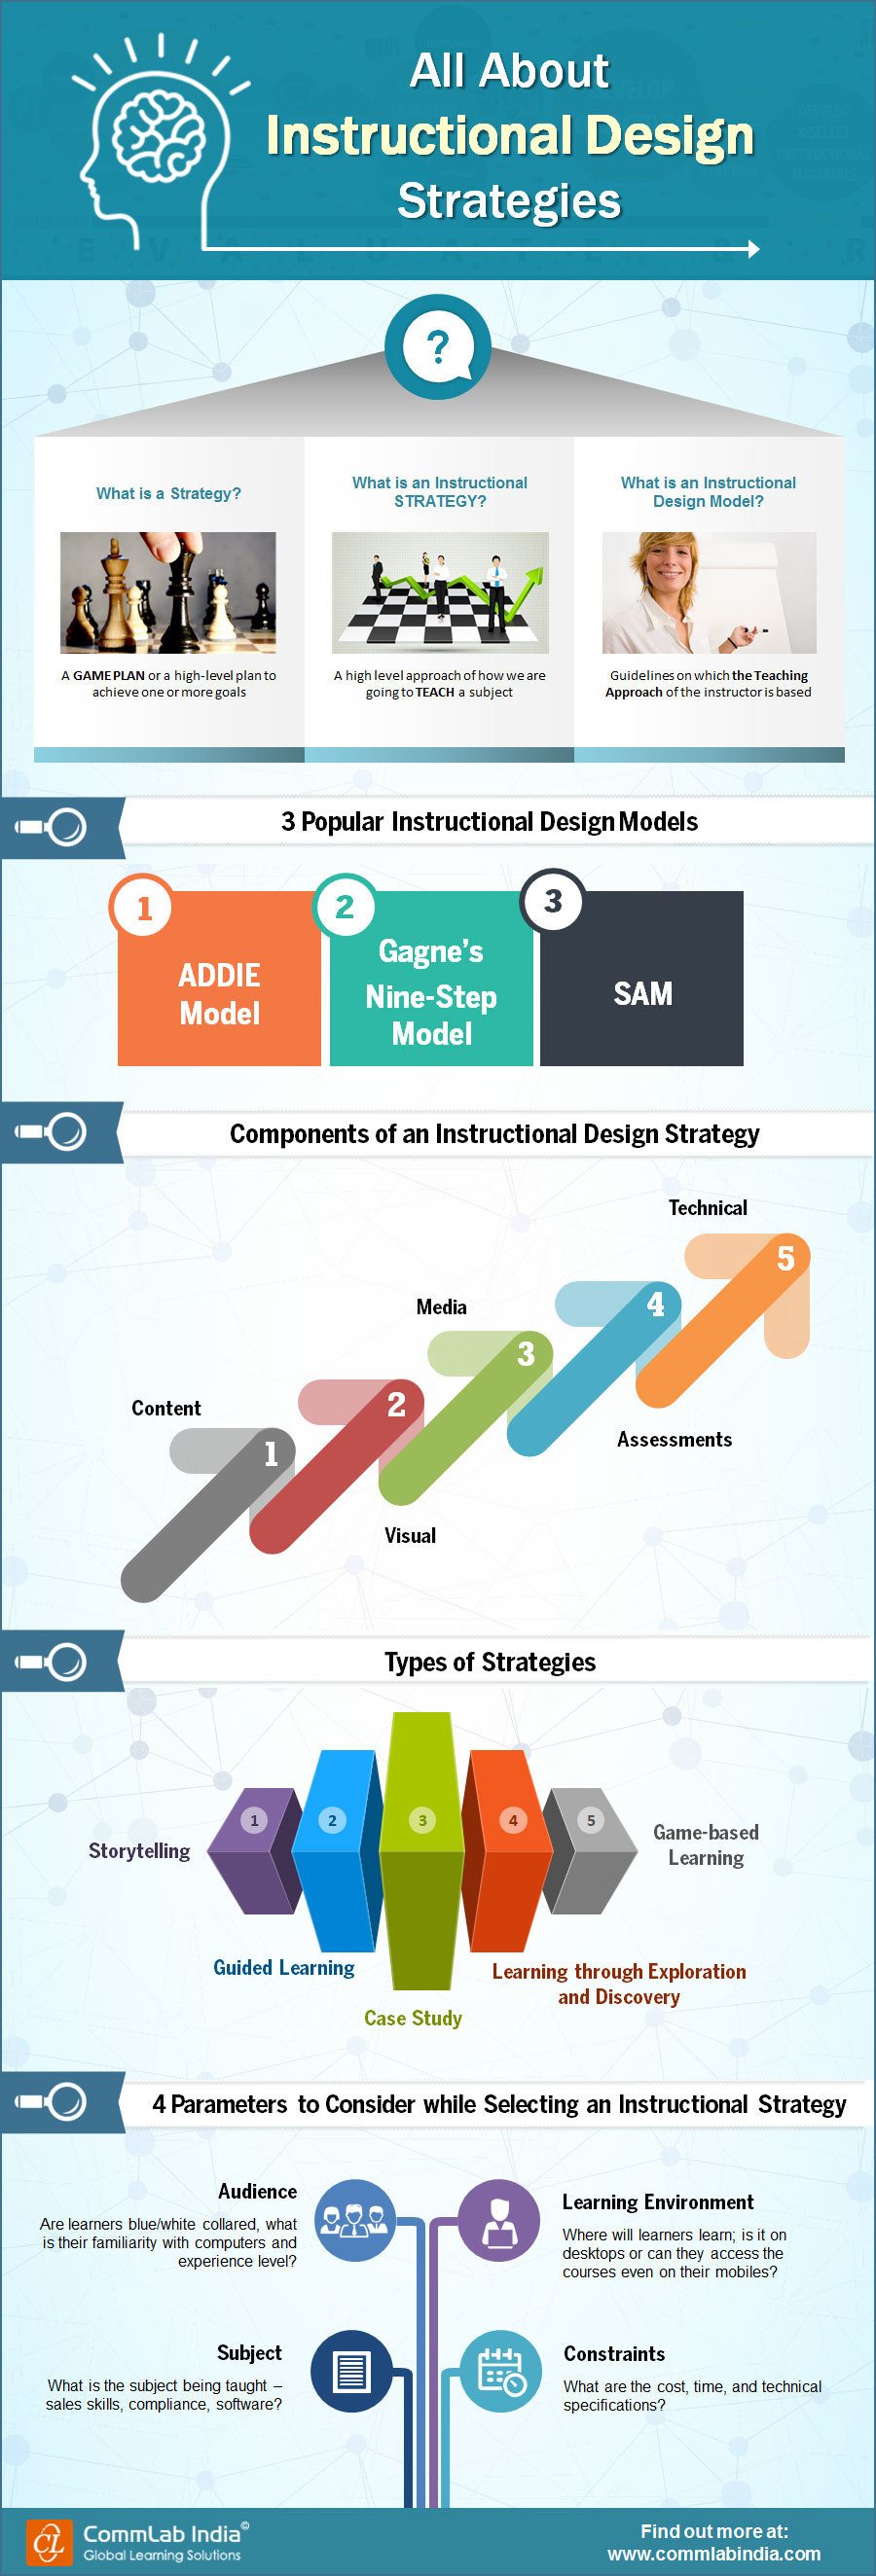 All About Instructional Design Strategies